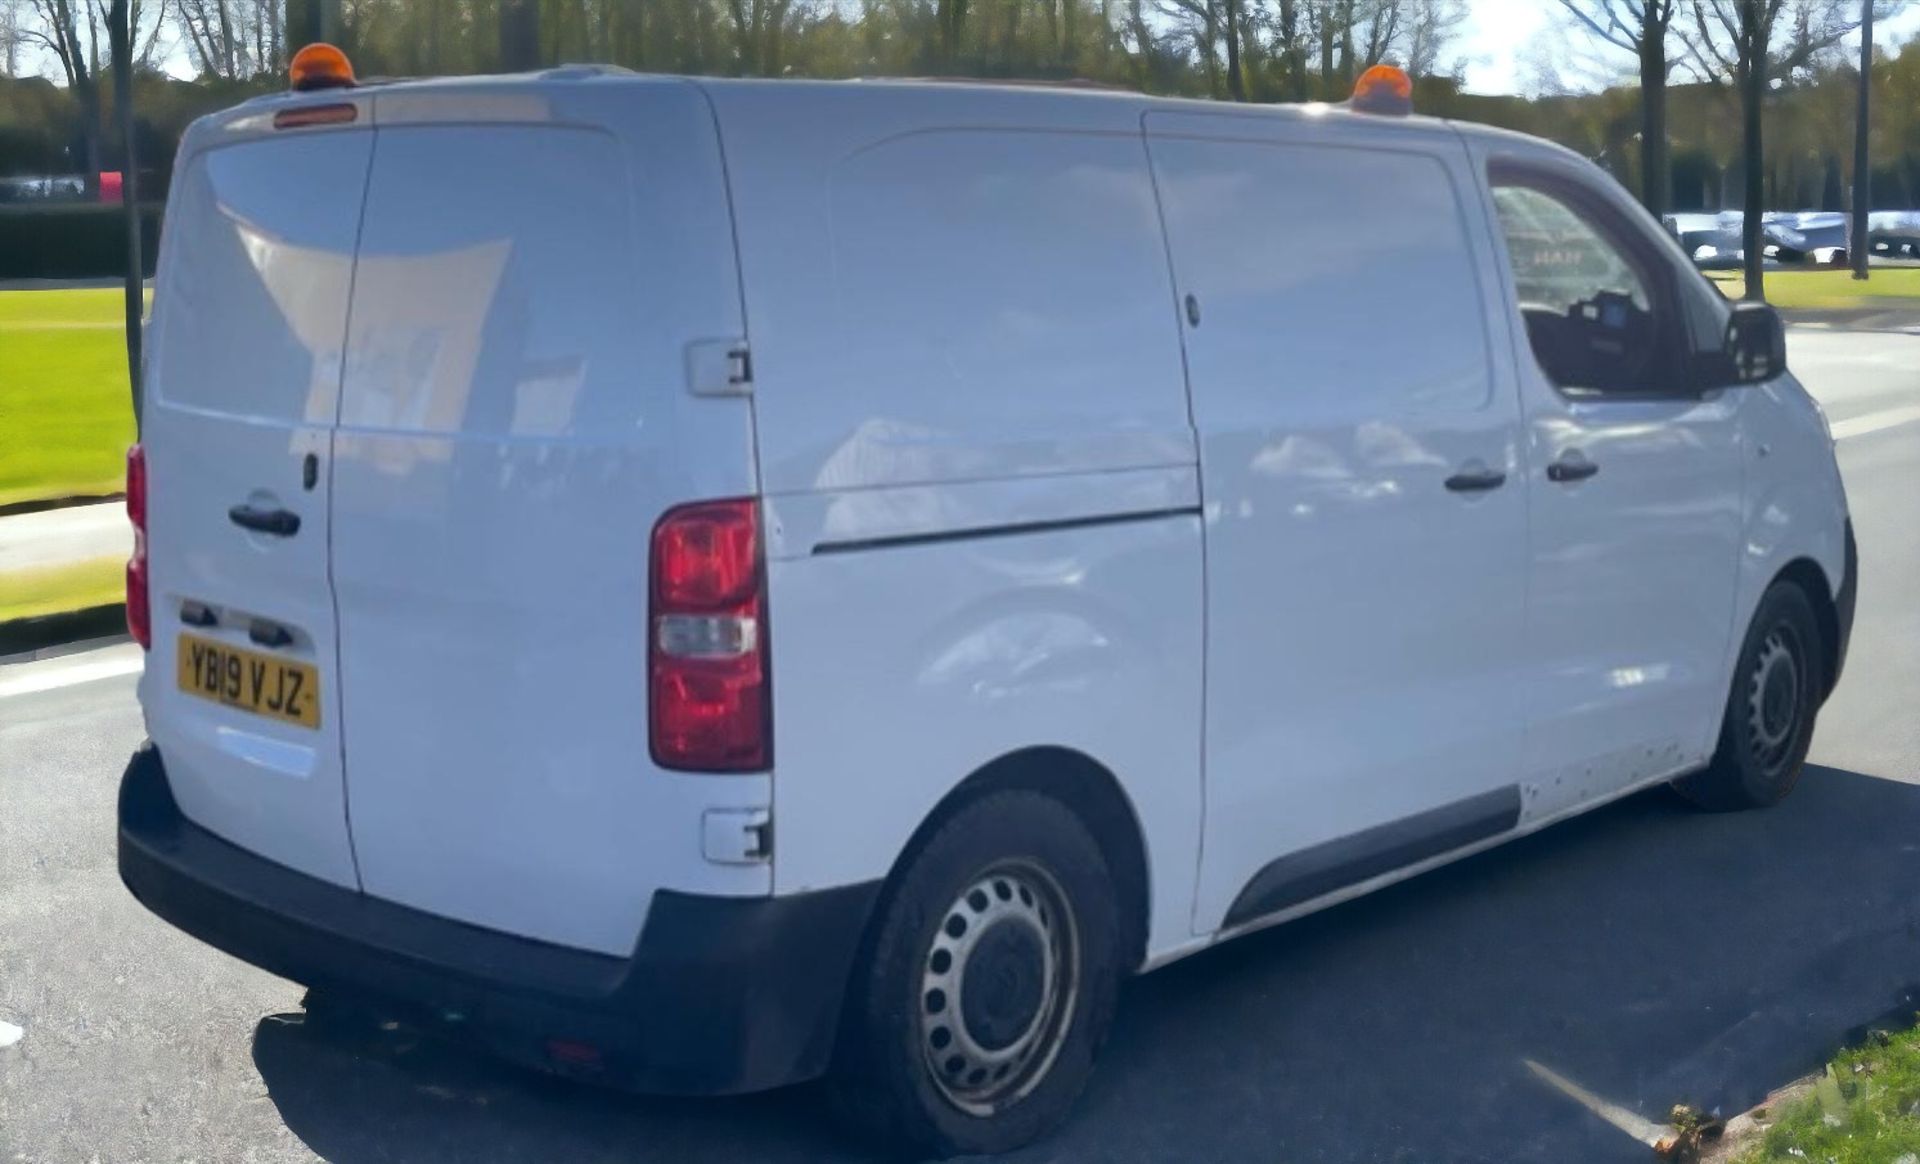 2019-19 REG CITROEN DISPATCH XS 1000 L1H1 - HPI CLEAR - READY TO GO! - Image 4 of 12